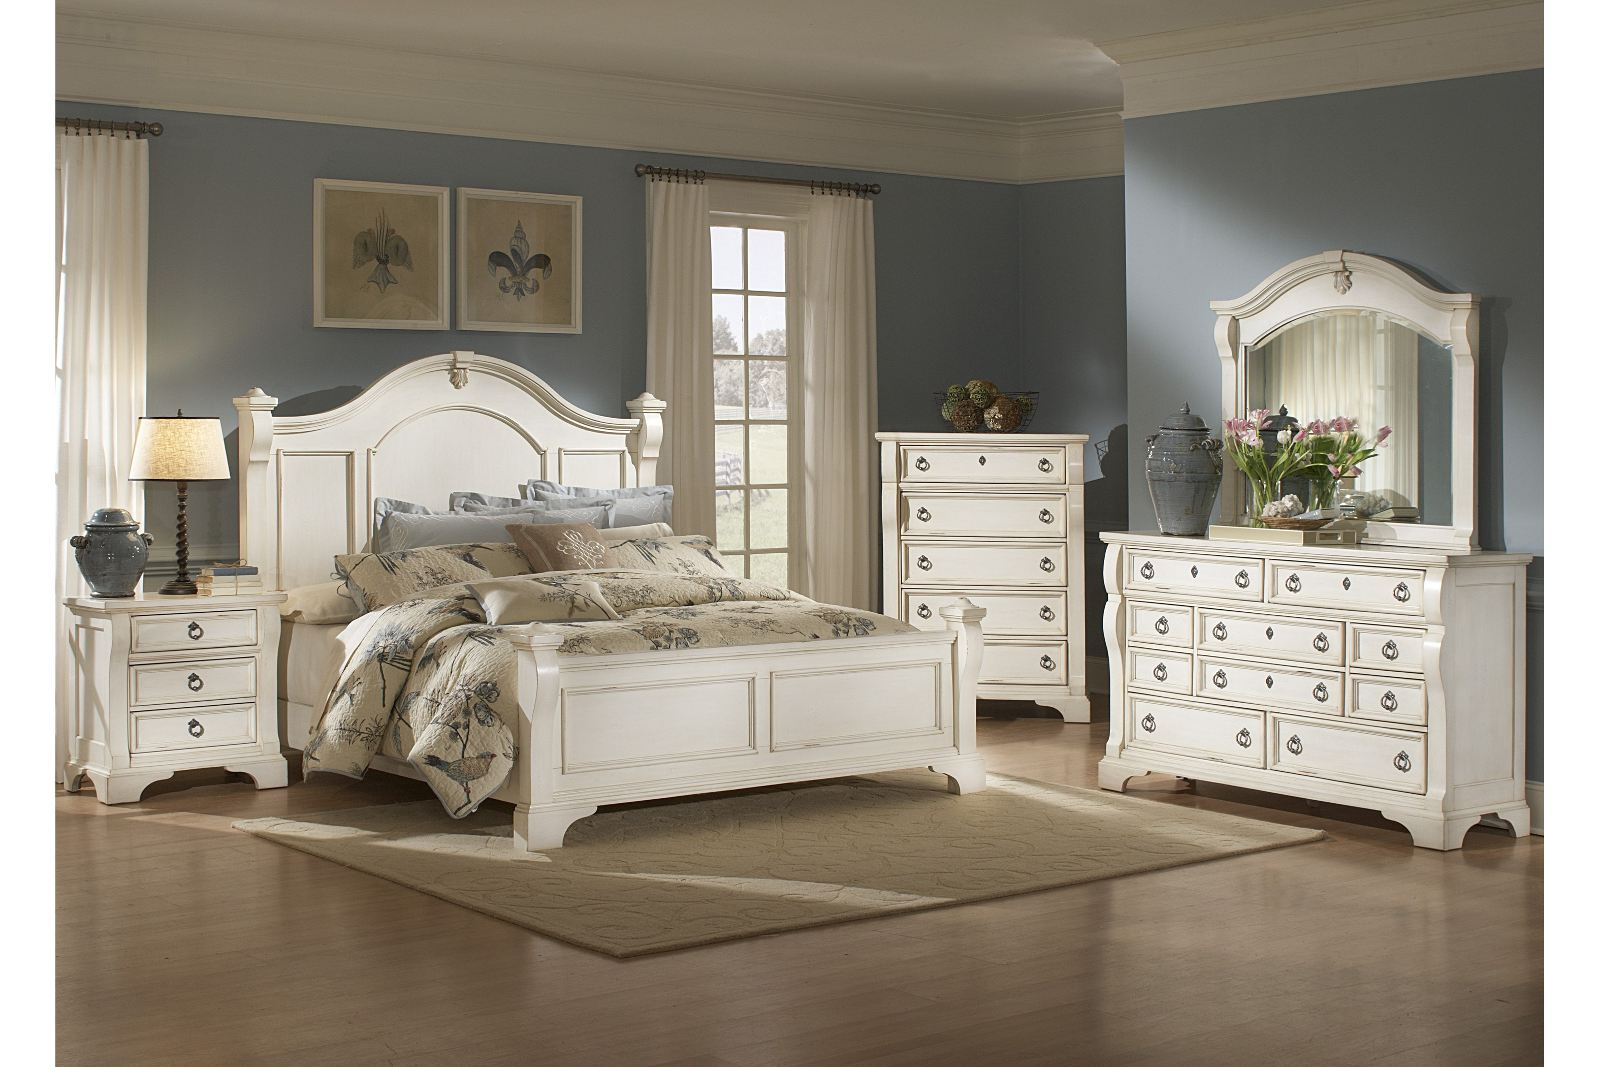 American Woodcrafters Heirloom Collection Poster Bedroom Set In Antique White 2910 within measurements 1600 X 1067